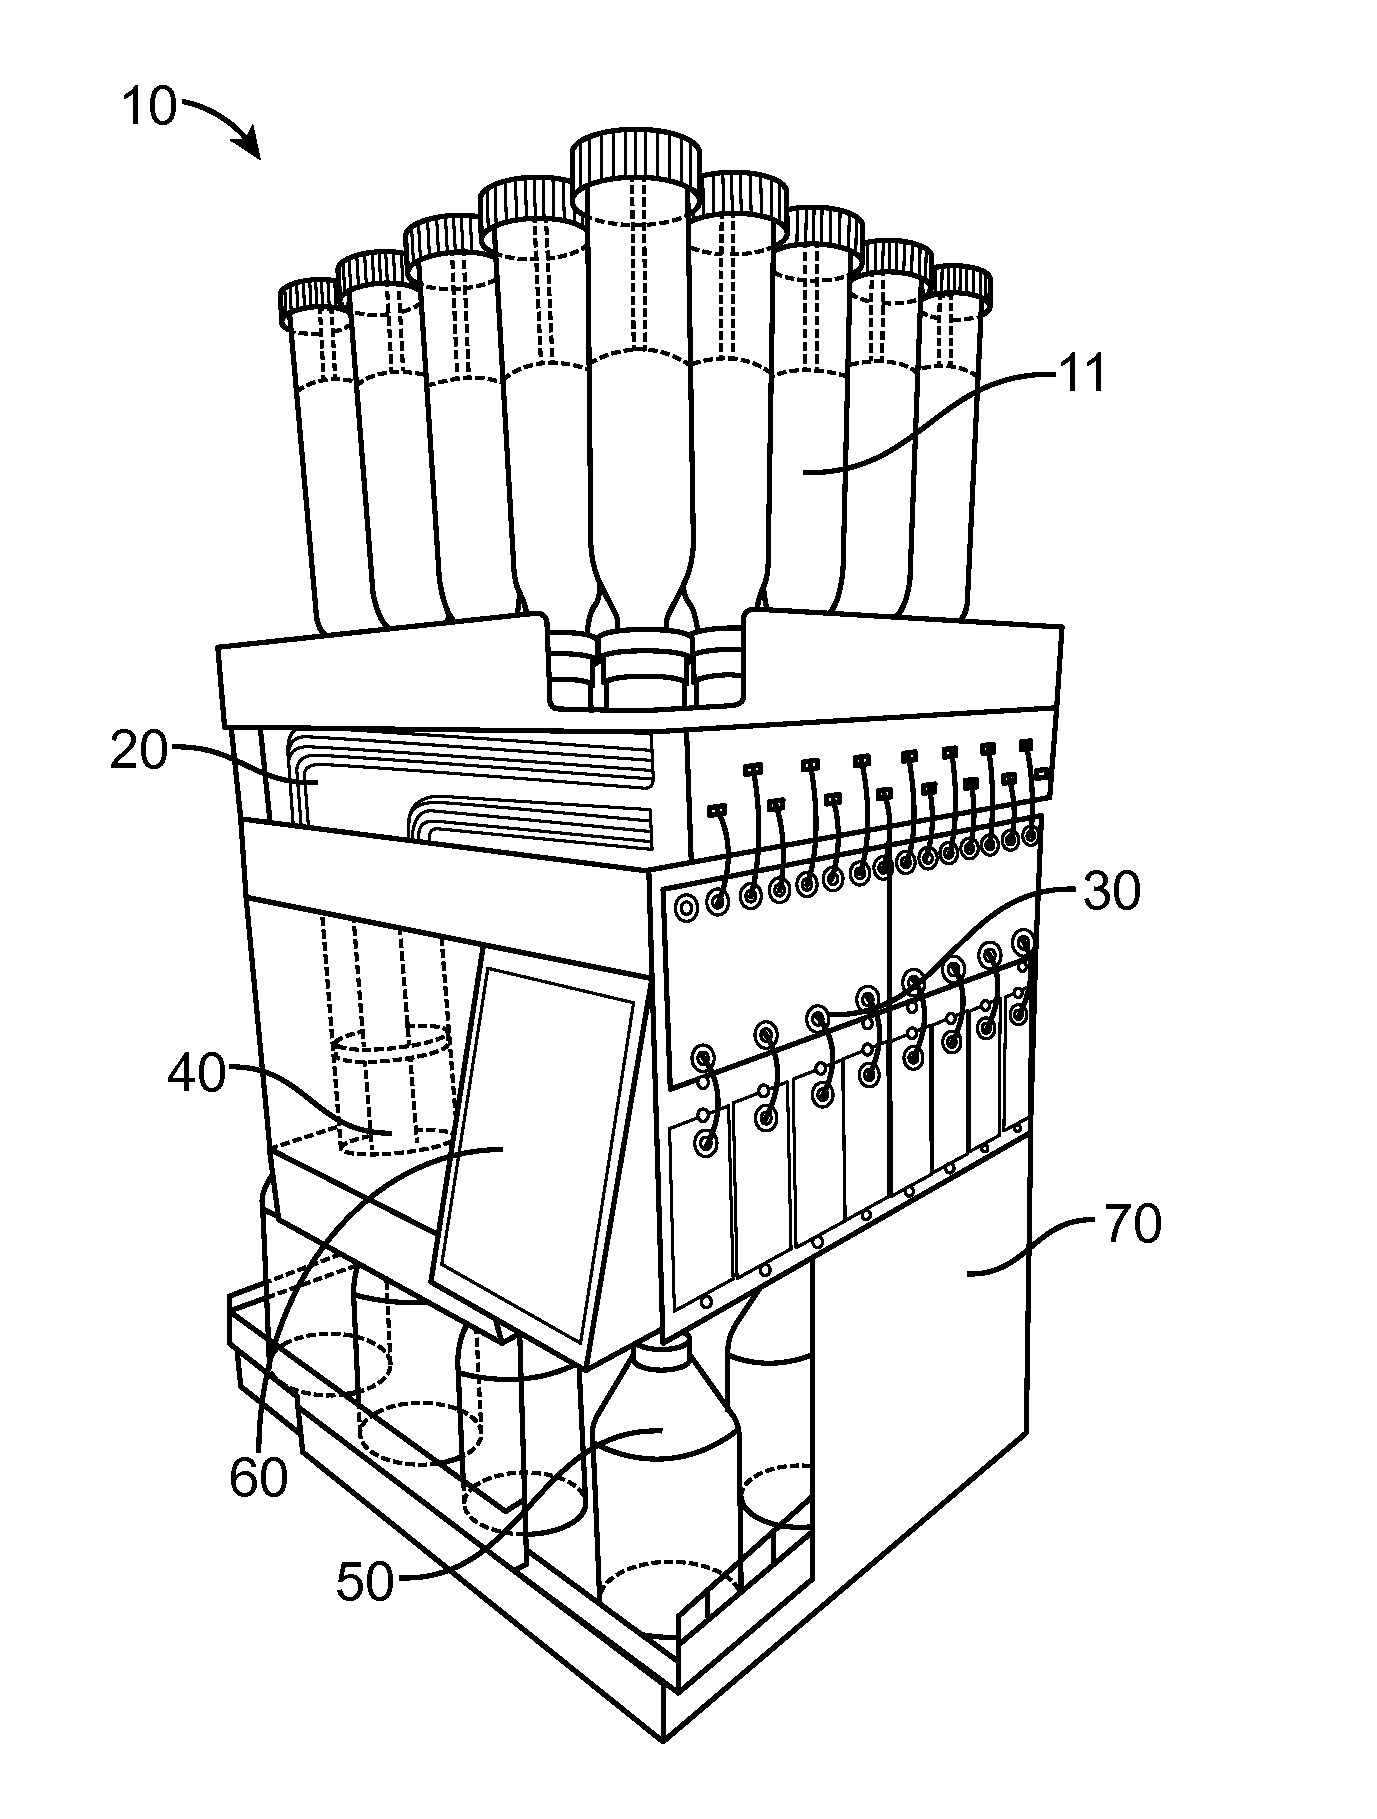 Automated solution dispenser